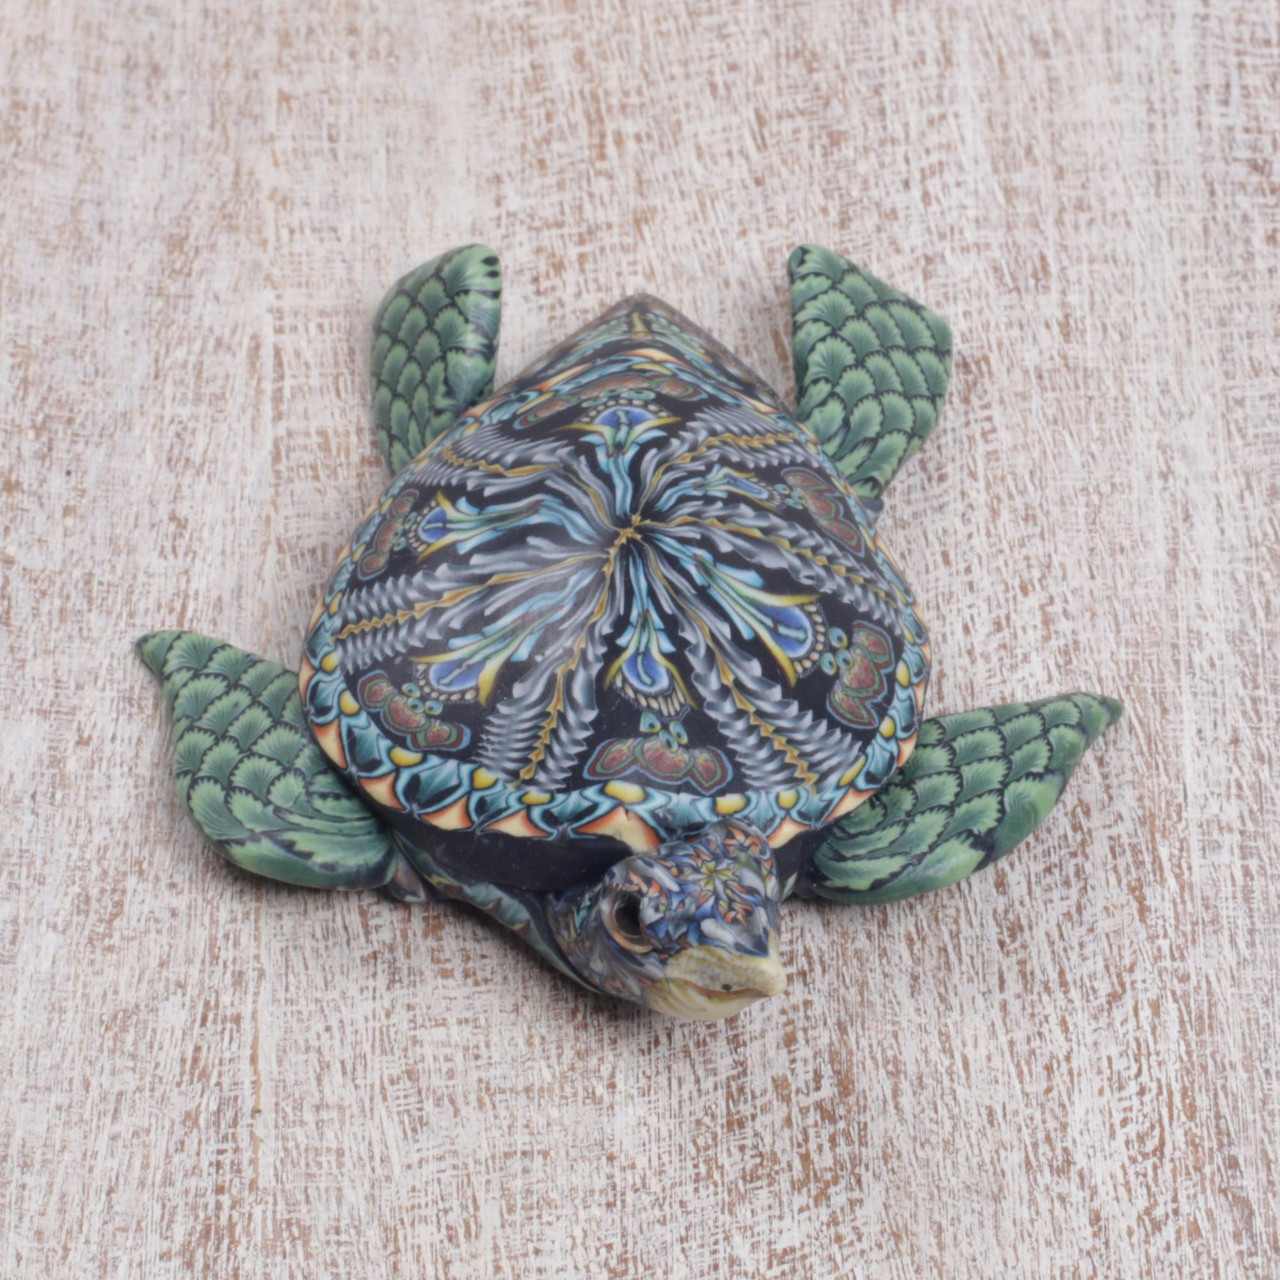 How to Make a Clay Turtle – Clay Creations by Nyla